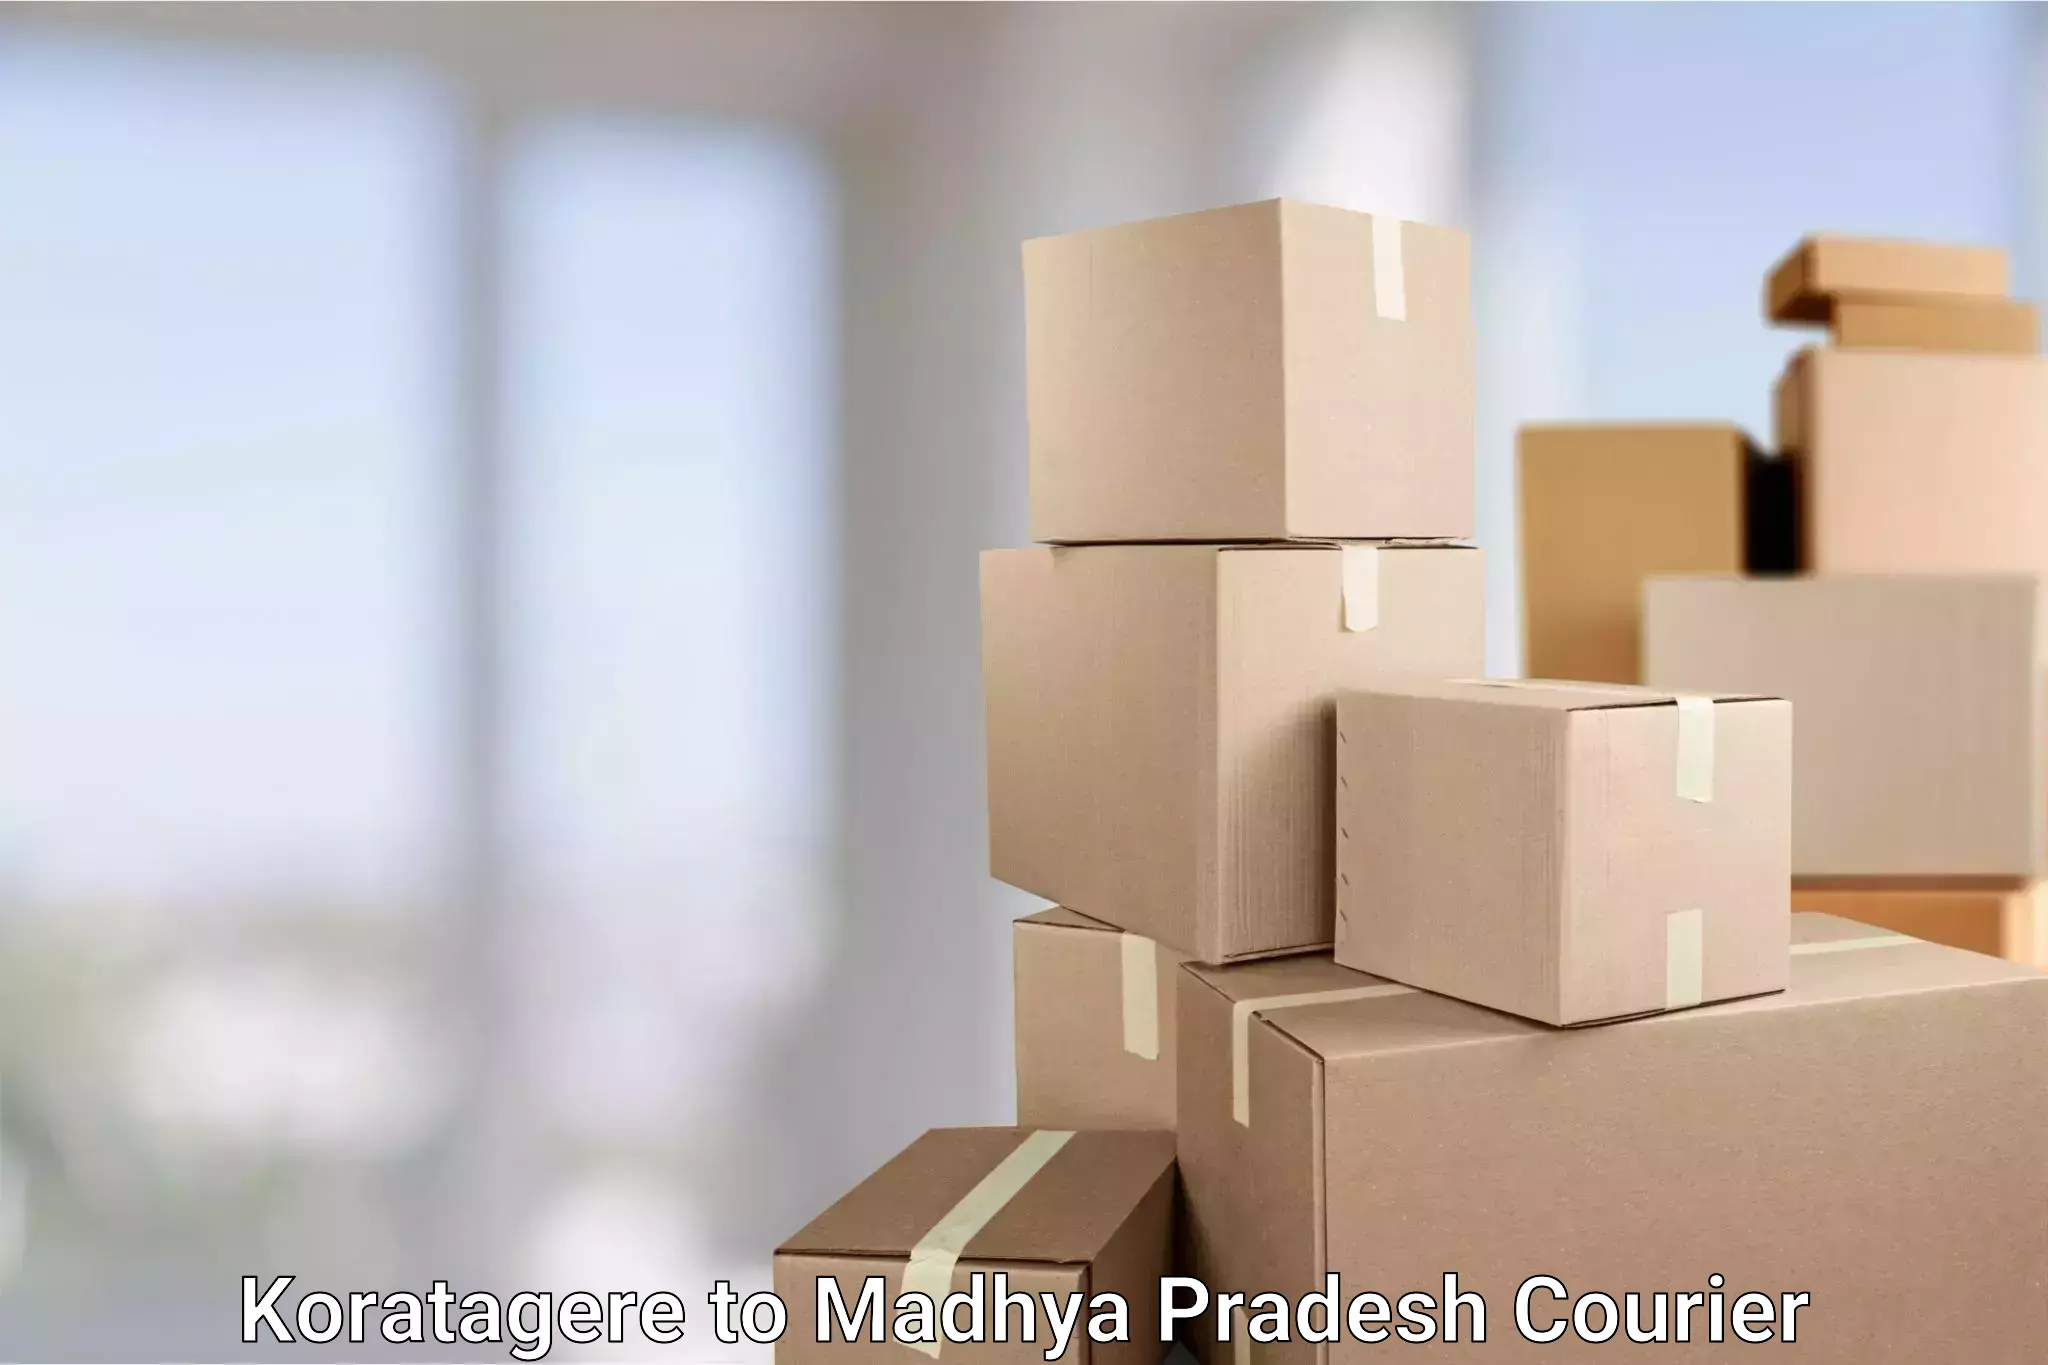 Seamless shipping experience Koratagere to IIIT Bhopal